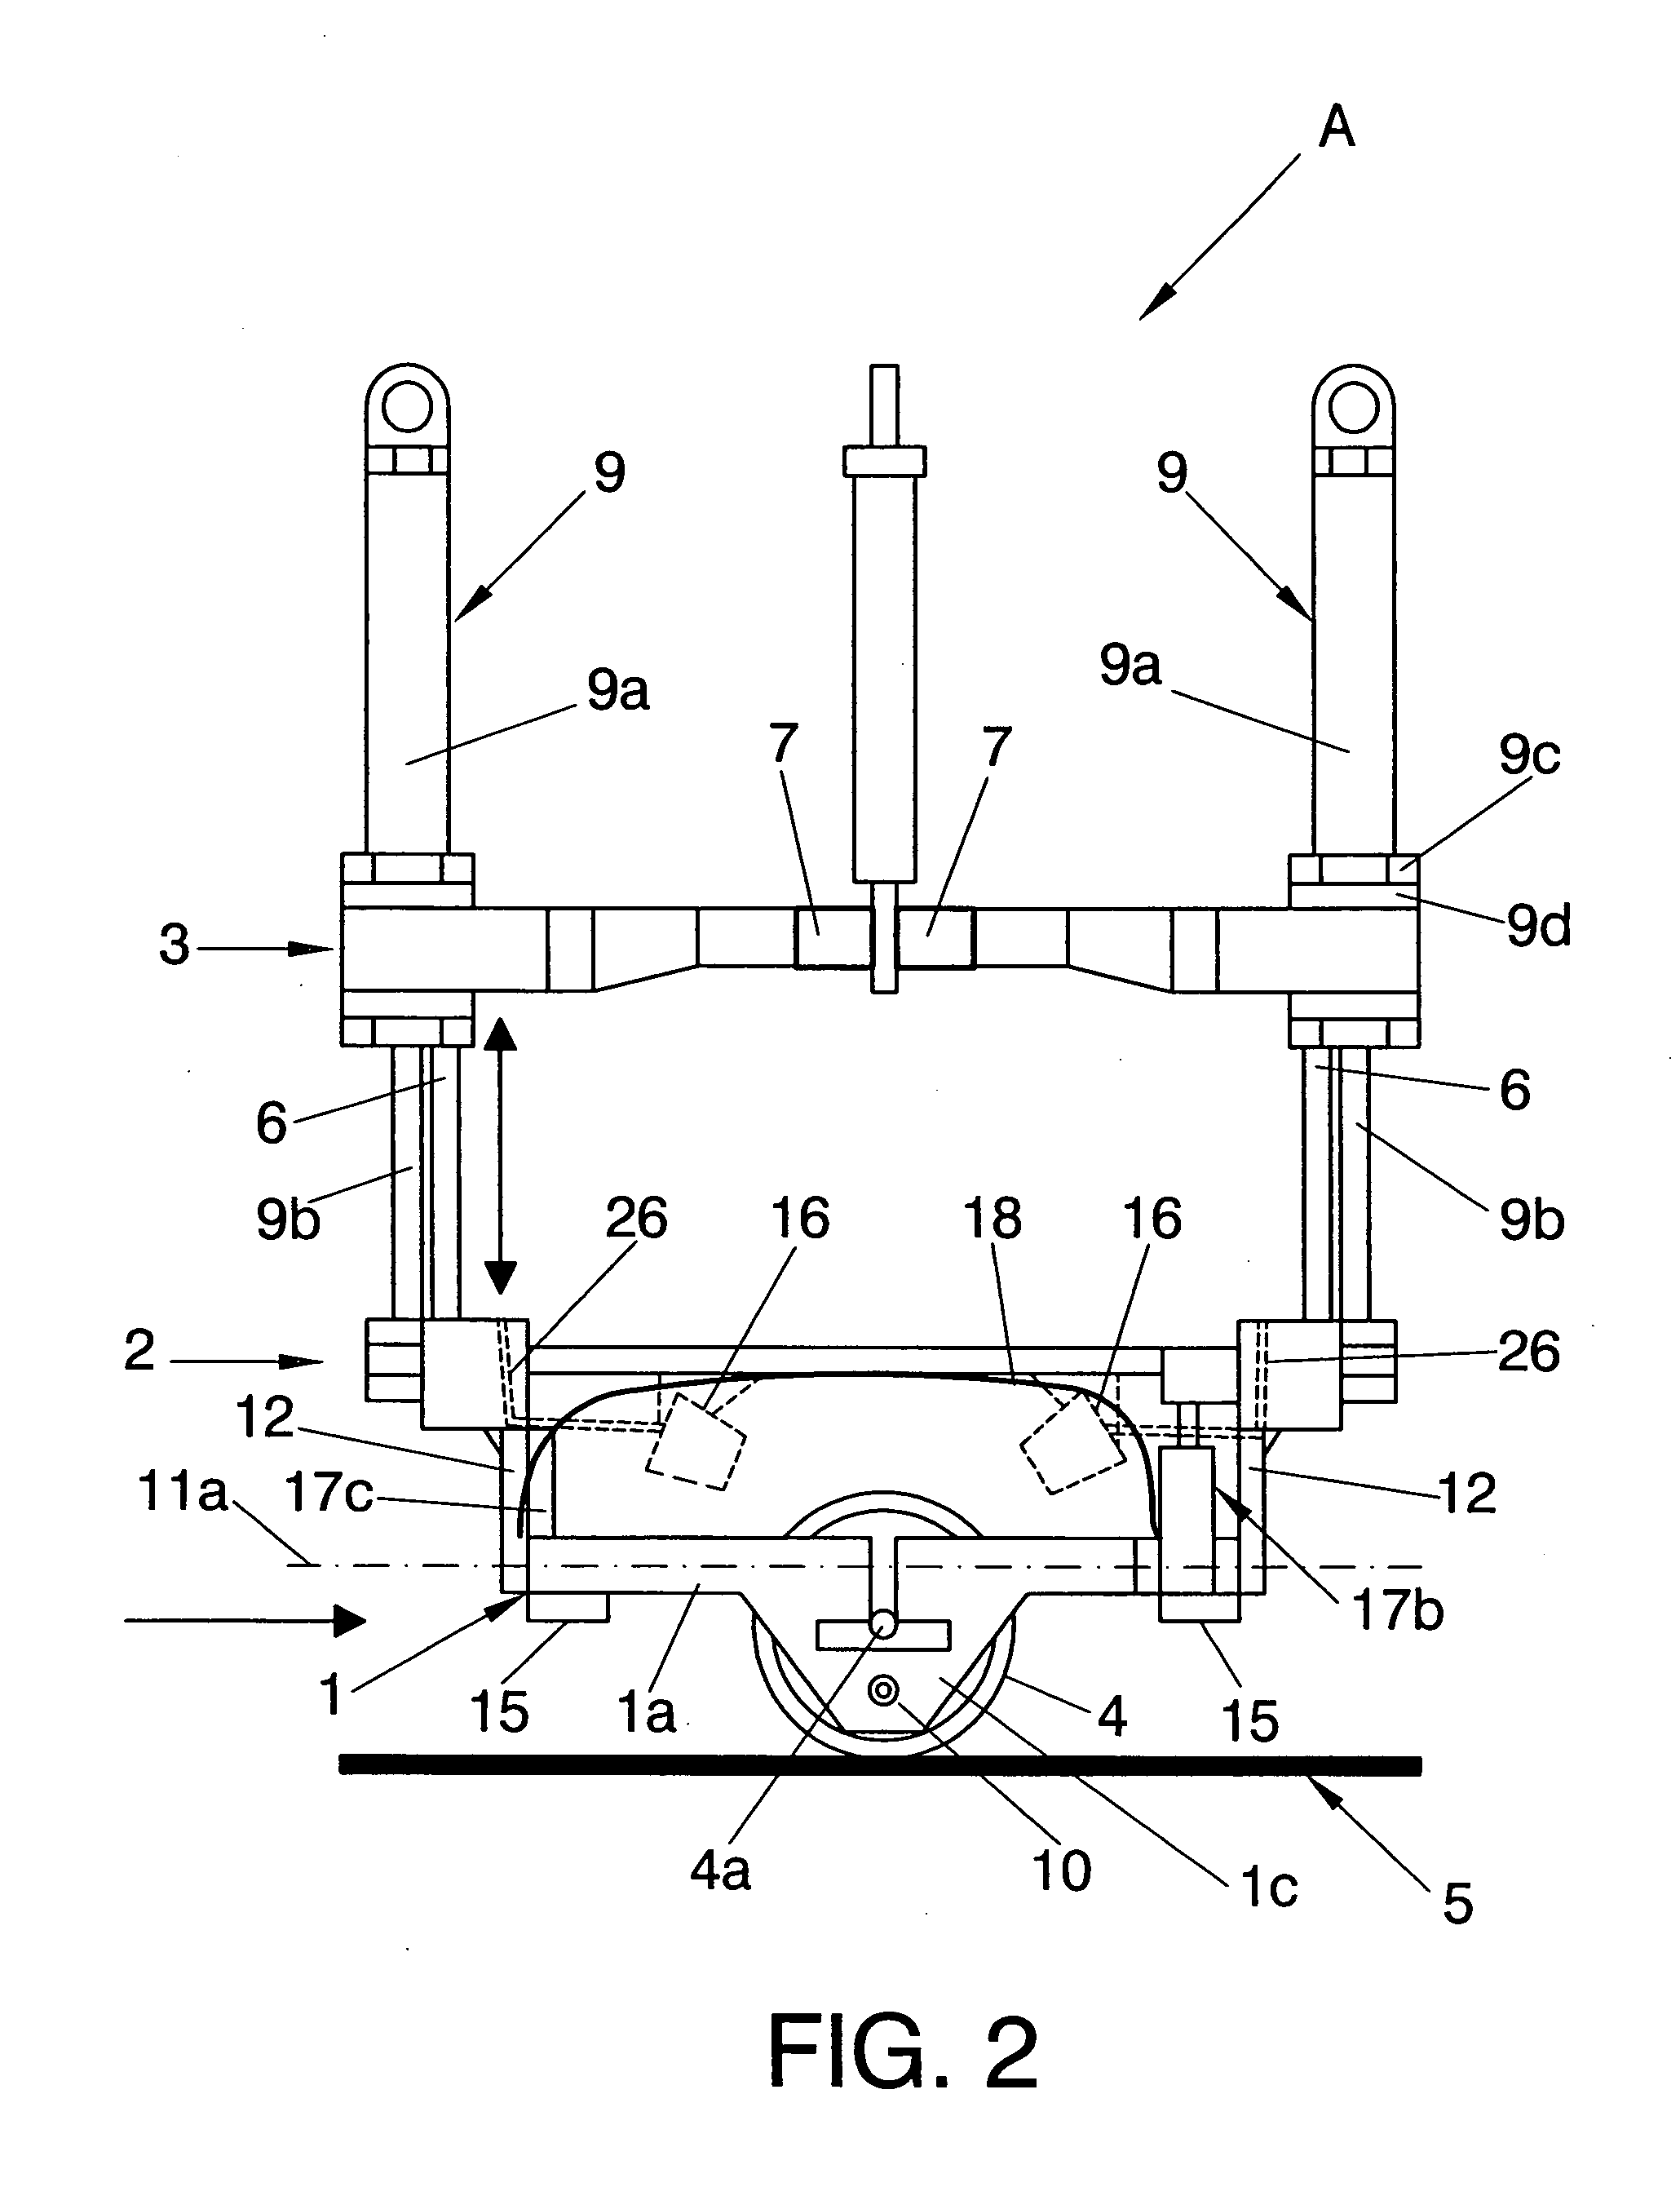 Head with roller for pulse-echo ultrasonic inspection of parts in an automatic parts inspection facility